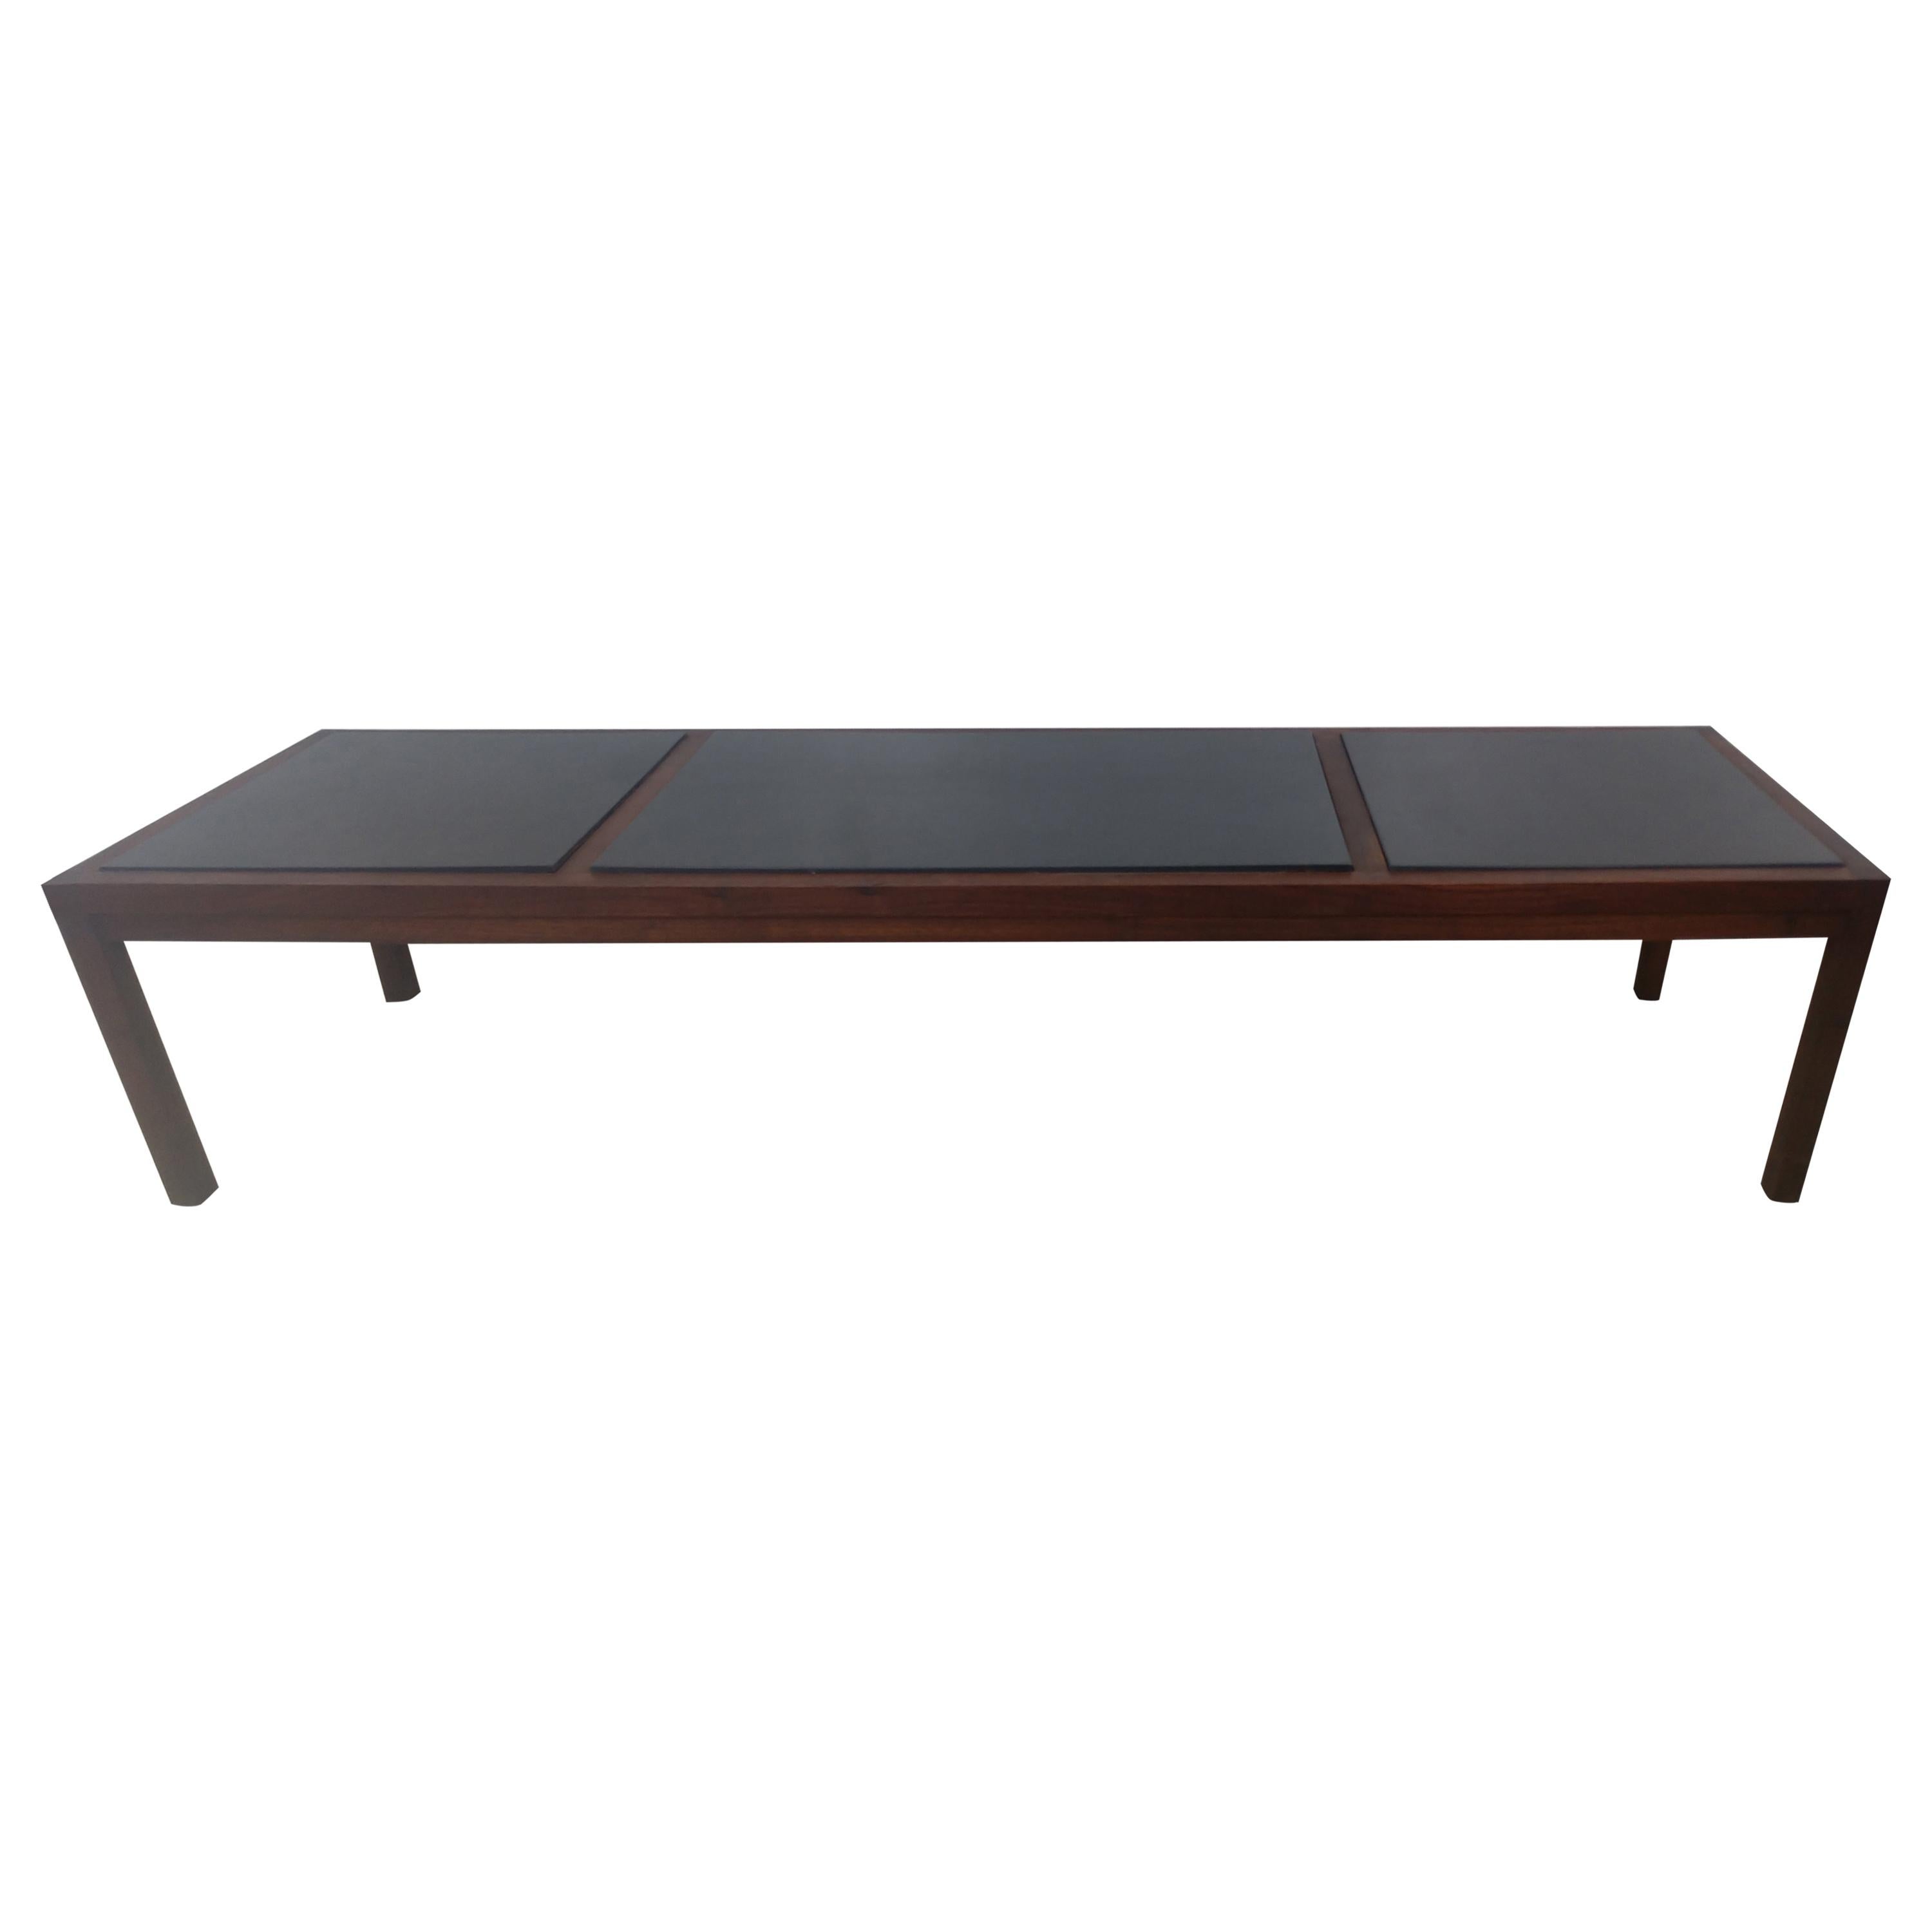 Mid-20th Century Mid-Century Modern Slate Top Cocktail Table, circa 1965 For Sale